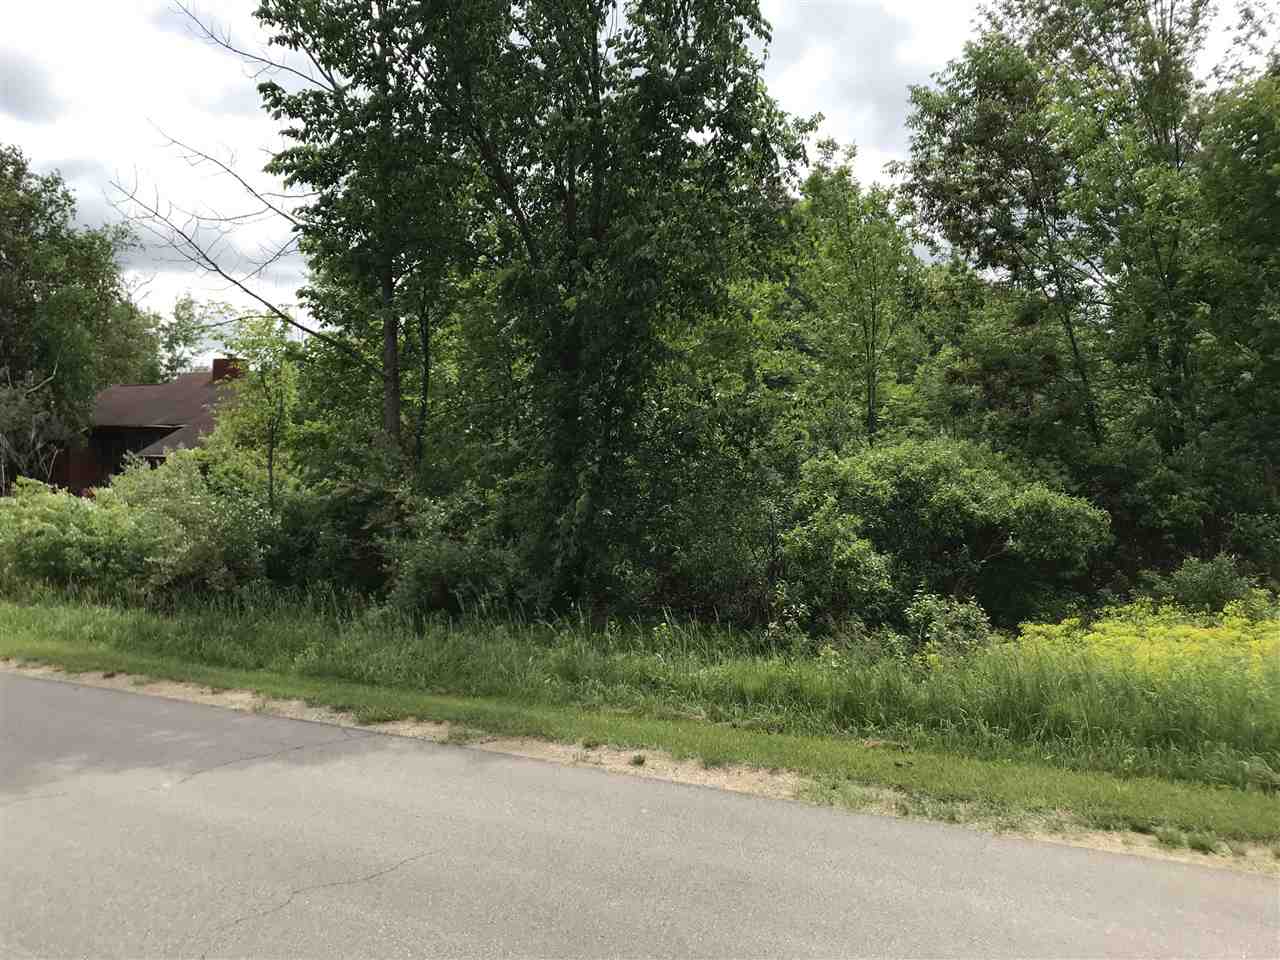 Unimproved lot across from Golf Course, in an area of nice homes.    Great location for camping or building. (You will need to connect to the sewer system to put camper on lot.     Ownership provides access to an 18 hole golf course , restaurant/pub, fitness center, indoor heated pool, tennis/bocce ball courts, chalet/sledding hill, walking (nature) trails, activity bldg, storage area, 2 all sports lakes, Lk Lancer/Lancelot, 15 beach clubs (5 with beach/bath house). Or fly to/from Sugar Springs off a 3500ft well maintained grass airpark.   www.airnav.com   5M6.    ALL just 2-1/2 hours from Detroit!